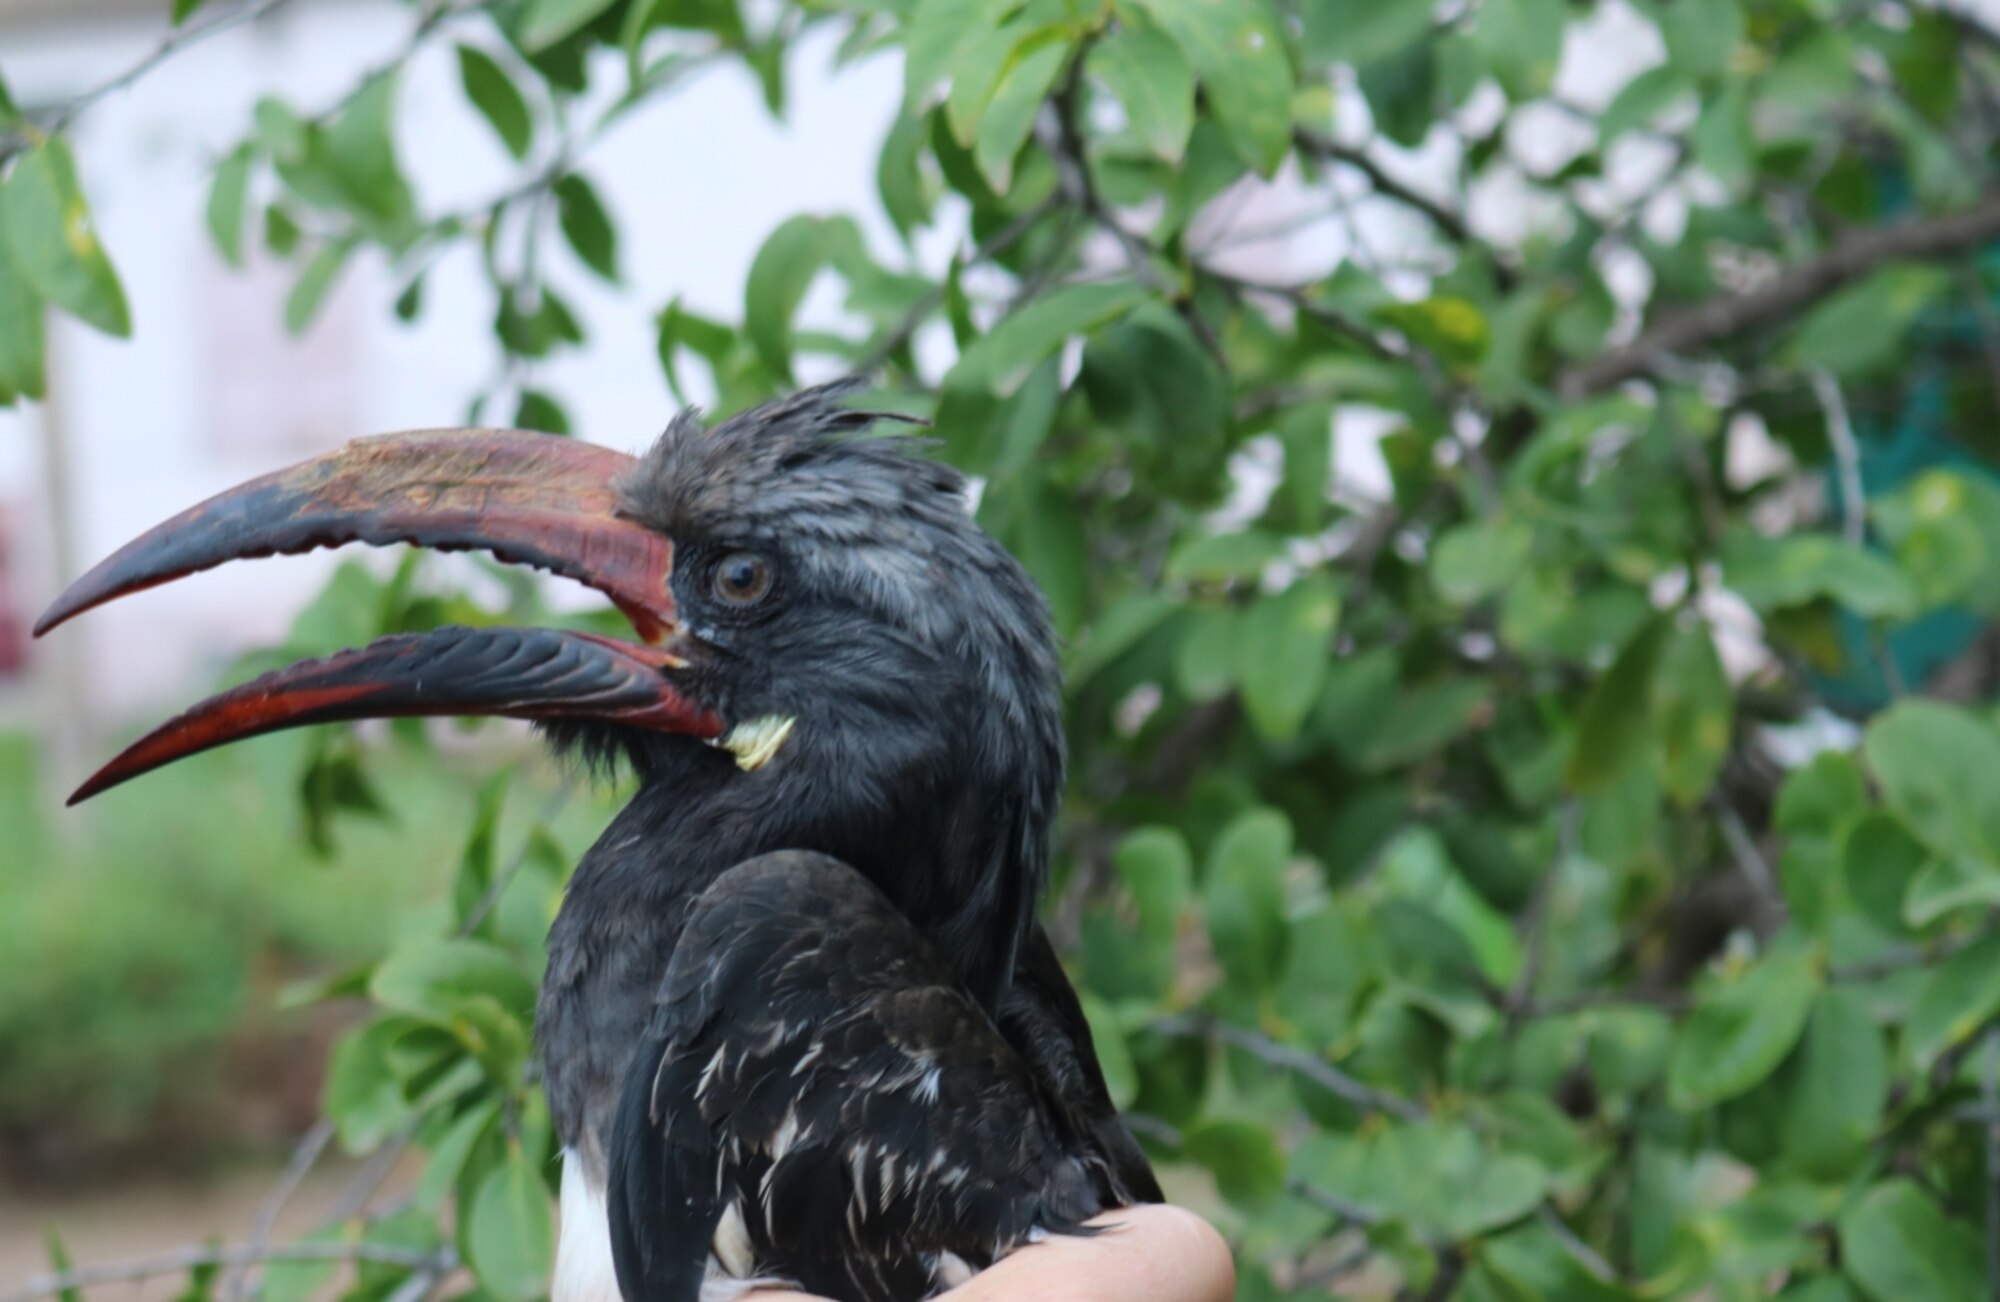 A photo of the Hemprich’s Hornbill taken up close during the Djibouti expedition.